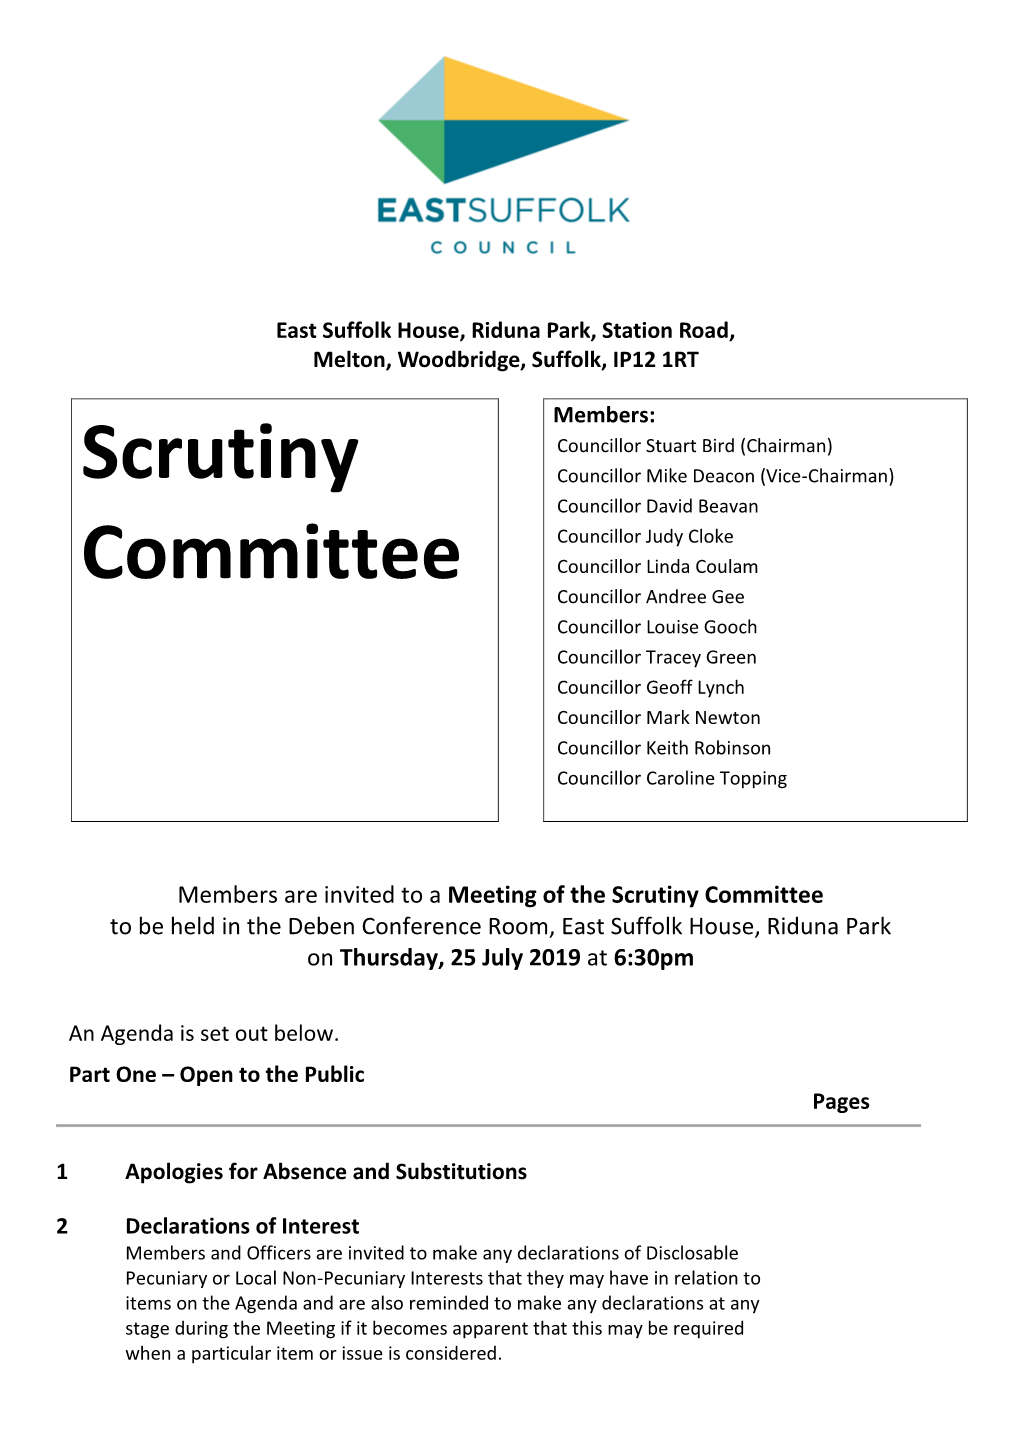 Scrutiny Committee to Be Held in the Deben Conference Room, East Suffolk House, Riduna Park on Thursday, 25 July 2019 at 6:30Pm